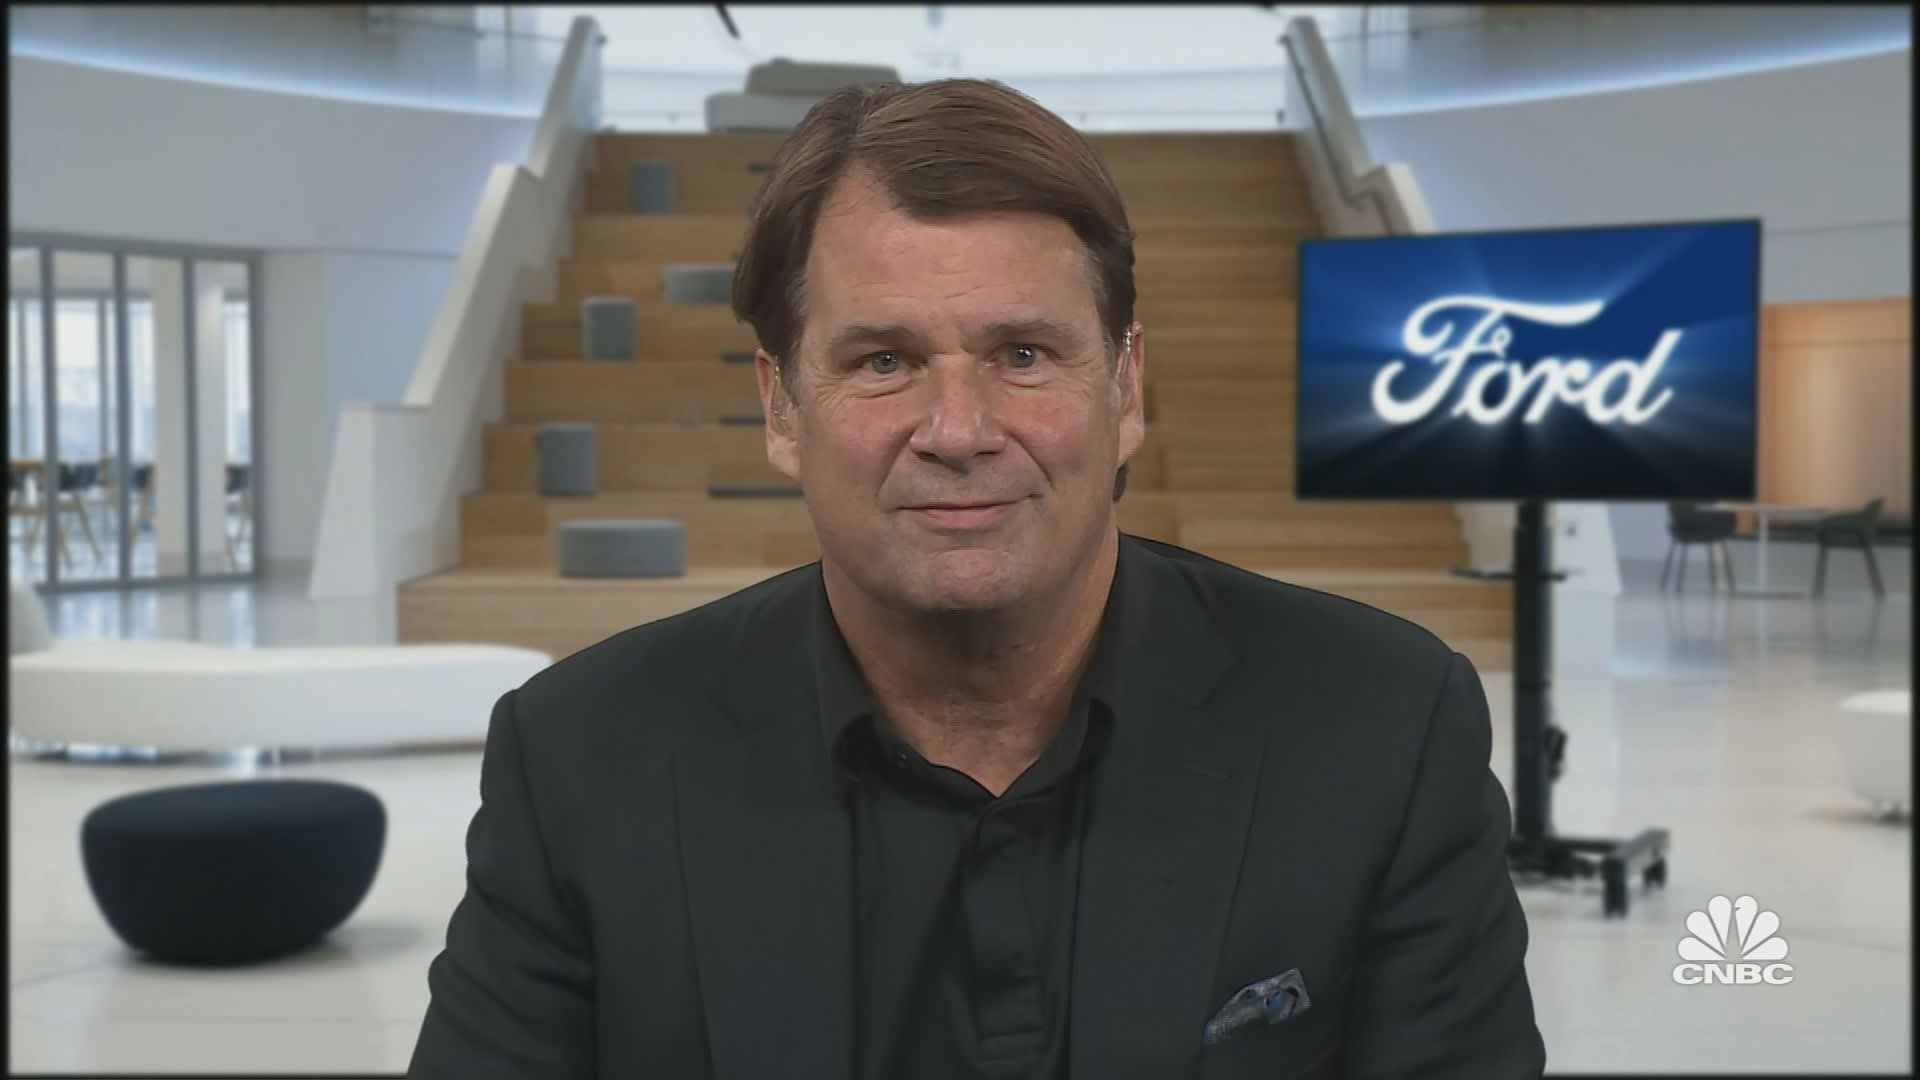 Ford CEO Jim Farley responds to rough quarter and carmaker losing $2 billion in 2022